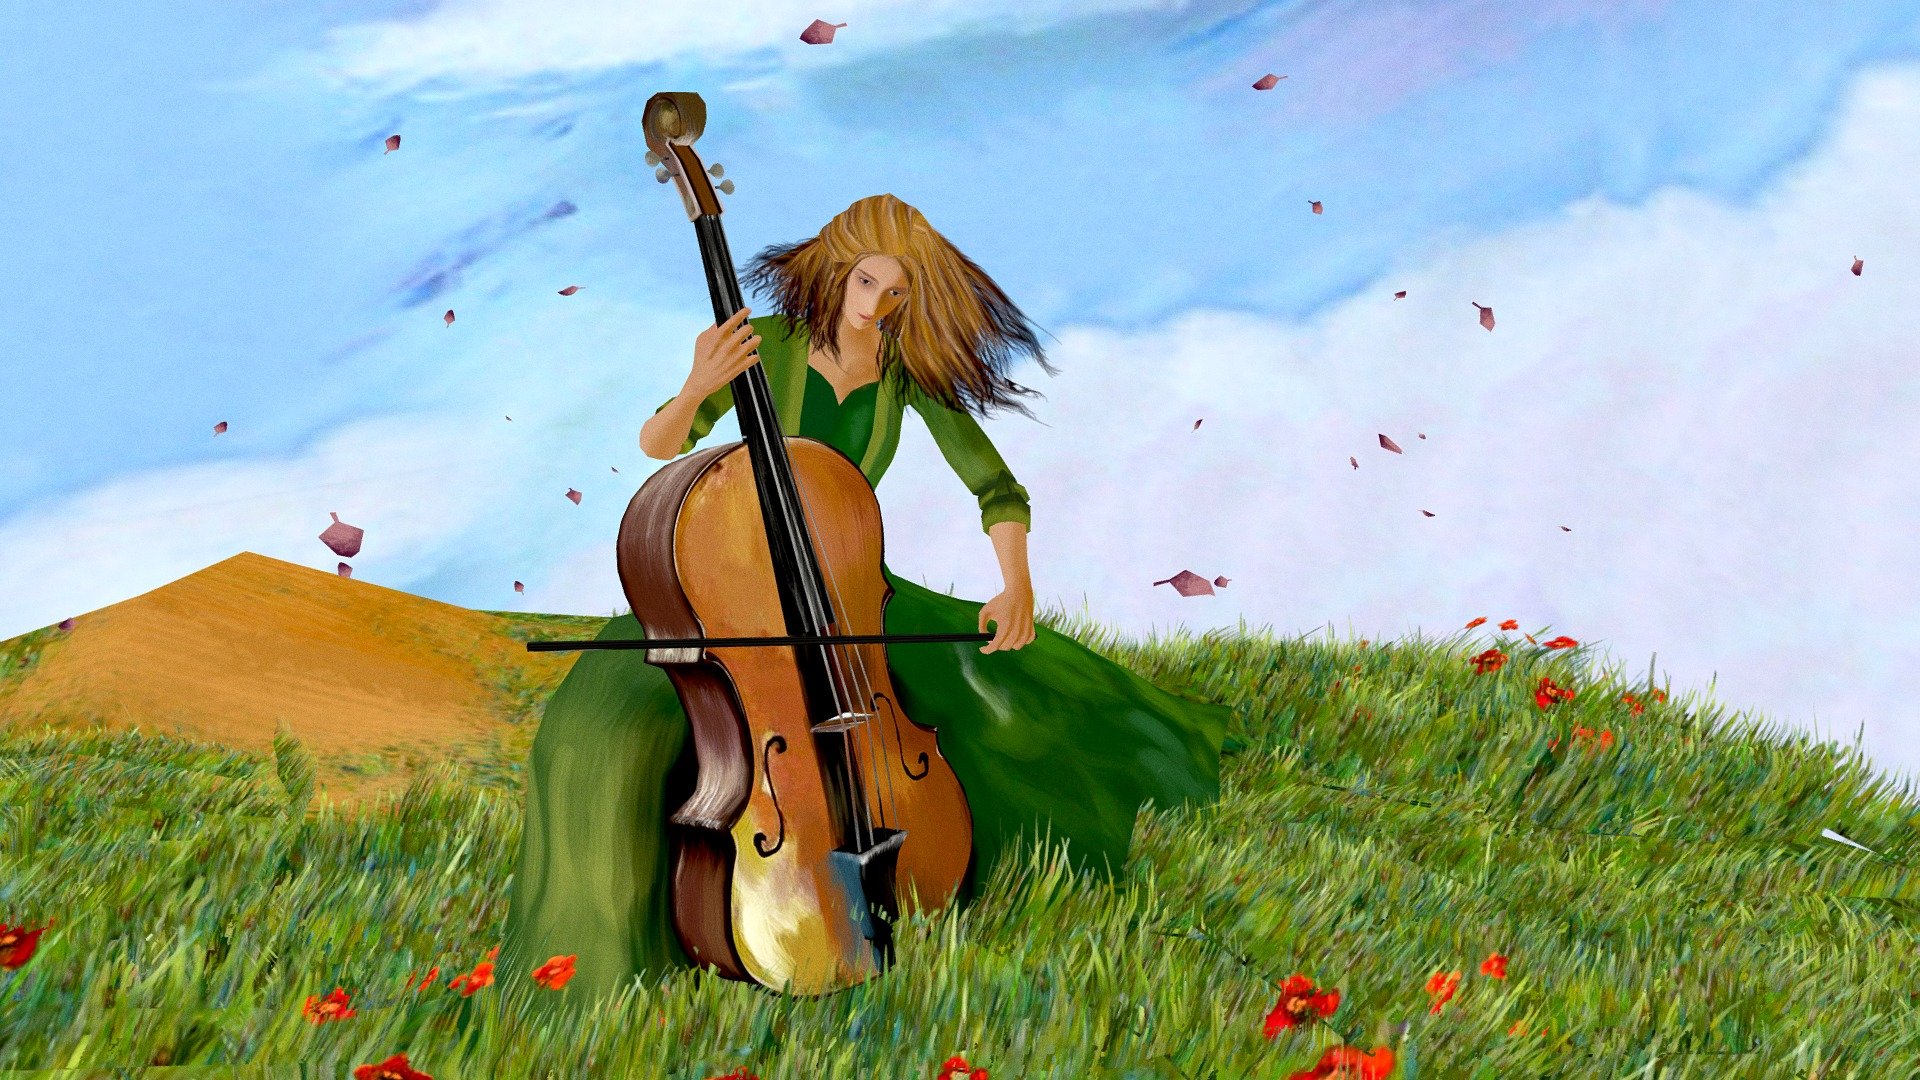 This stunning portrait has been drawn by one of our employees. We decided to breathe life into it and make it even more pleasant to look at. Thus, we created an animation based on the storyline of the picture and used AR to bring the picture to life, with the girl playing the violin in real time. This has been our very first AR project. It has since fascinated thousands of viewers.
 - Girl playing the cello - 3D model by arloopa 3d model